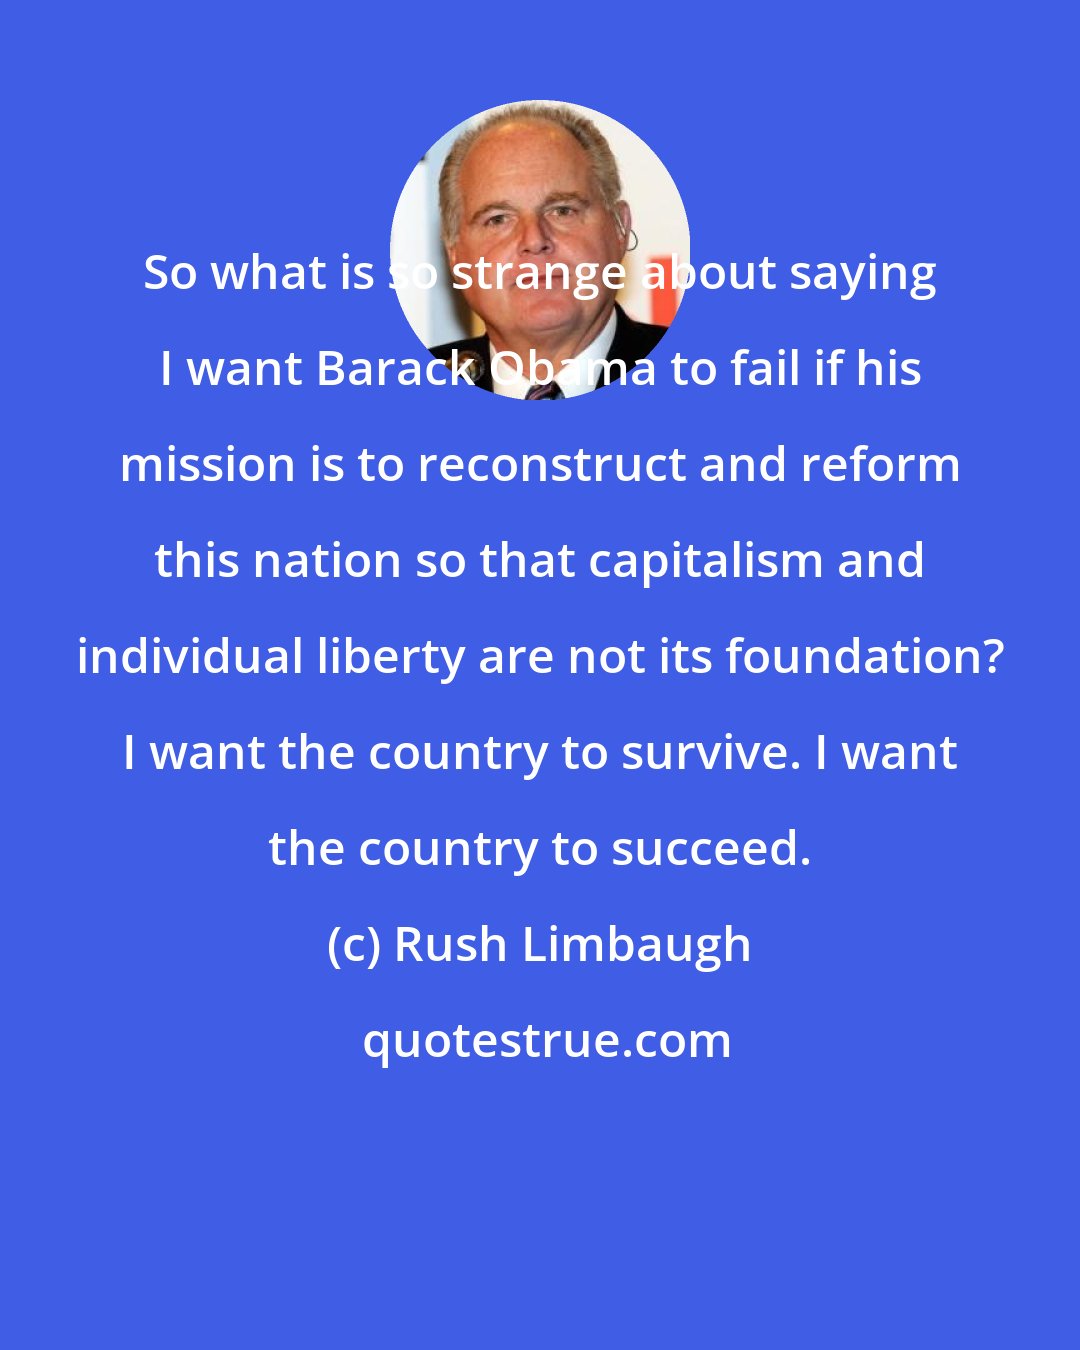 Rush Limbaugh: So what is so strange about saying I want Barack Obama to fail if his mission is to reconstruct and reform this nation so that capitalism and individual liberty are not its foundation? I want the country to survive. I want the country to succeed.